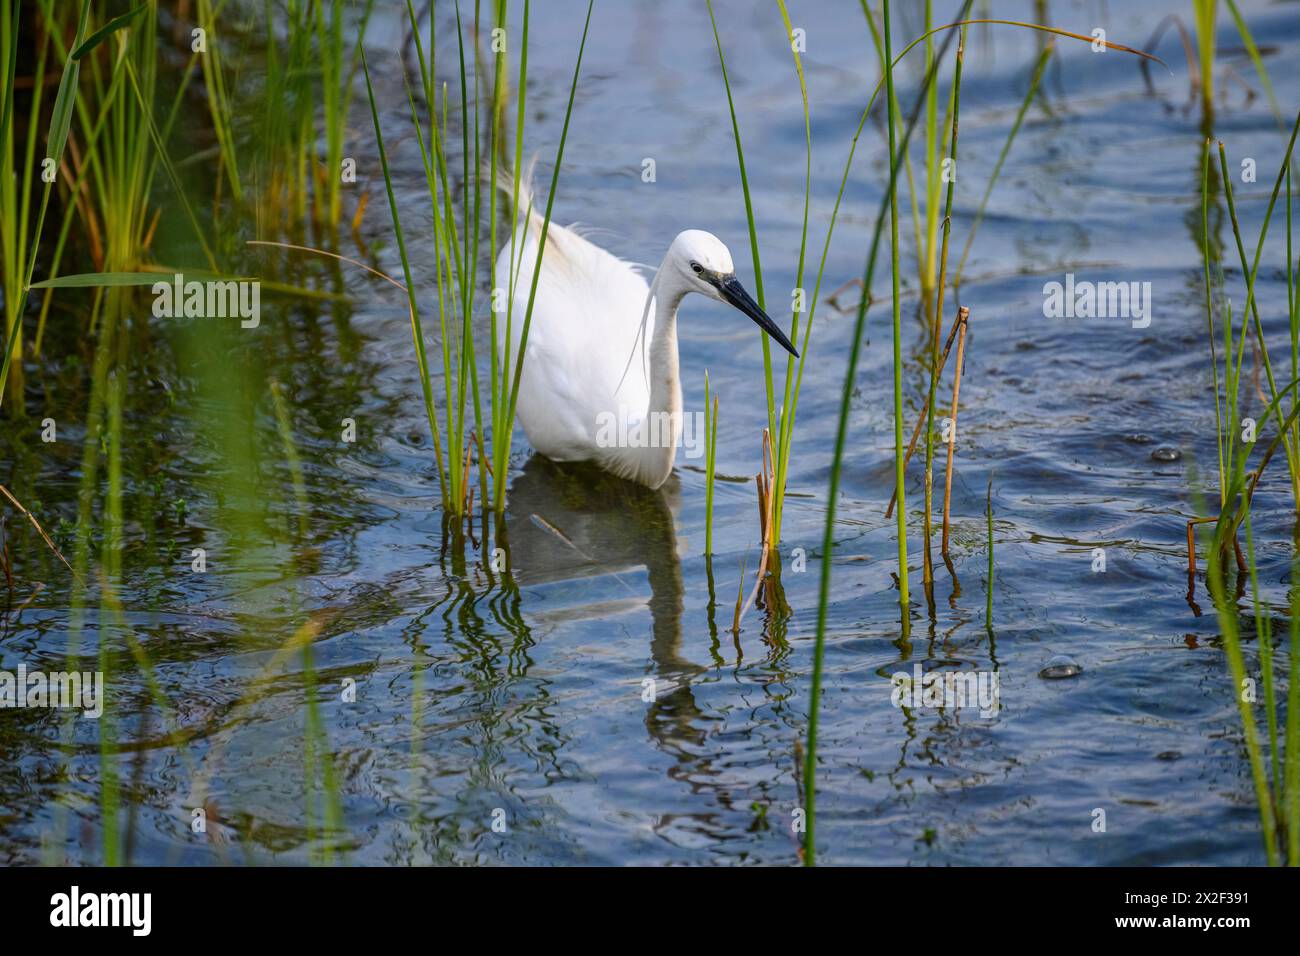 Egretta garzetta - Little Egret, This small white heron is native to warmer parts of Europe and Asia, Photographed at the man-made ecological pond and Stock Photo